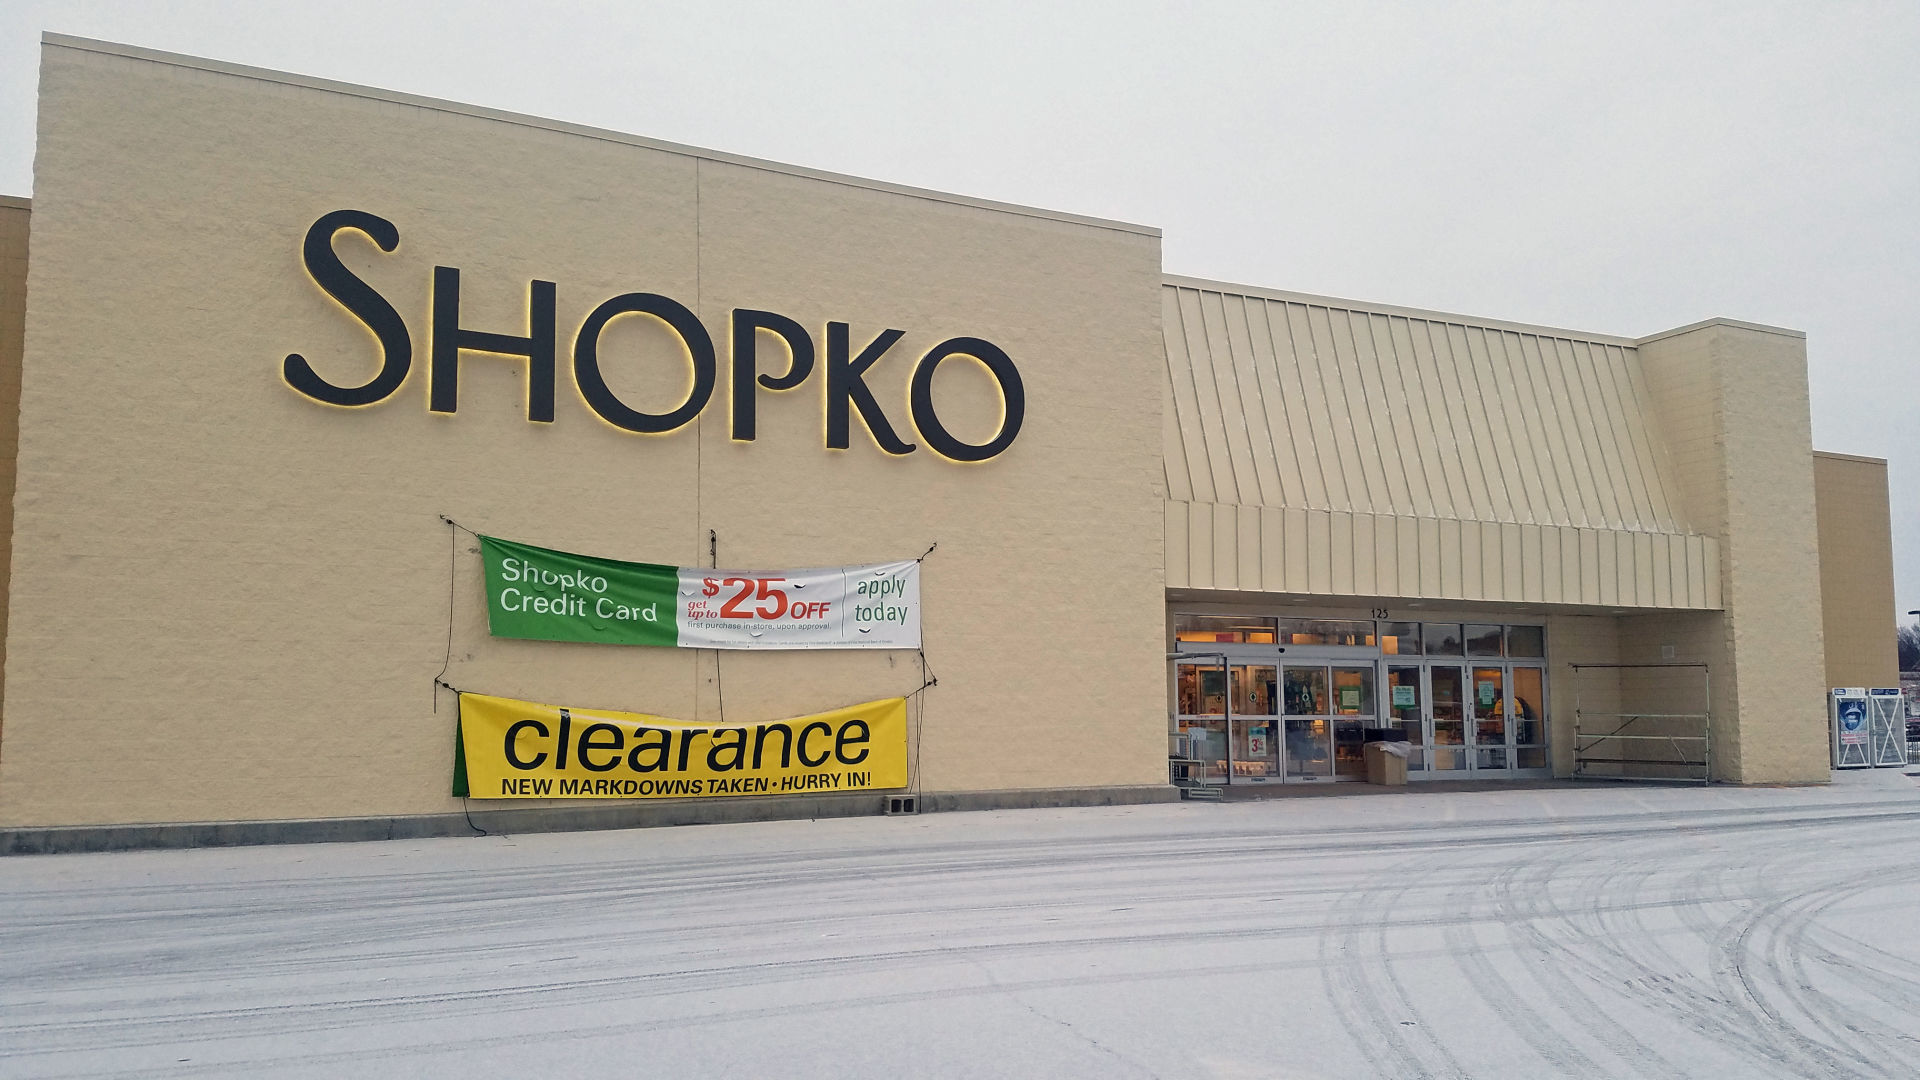 List of Shopko stores closing grows 